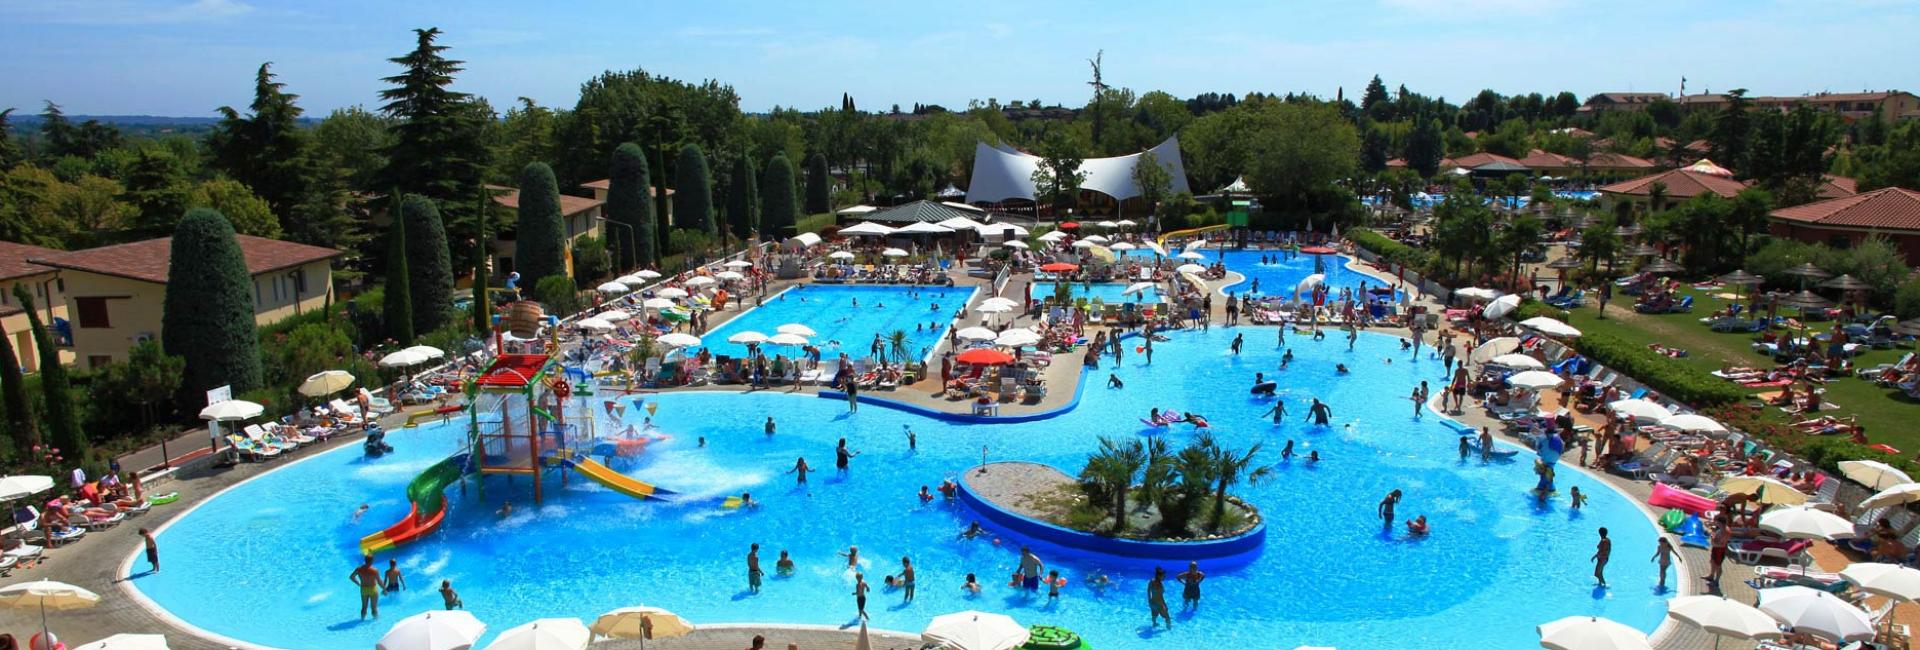 camping-bellaitalia fr 1-fr-303525-offre-speciale-ouverture-n2 019